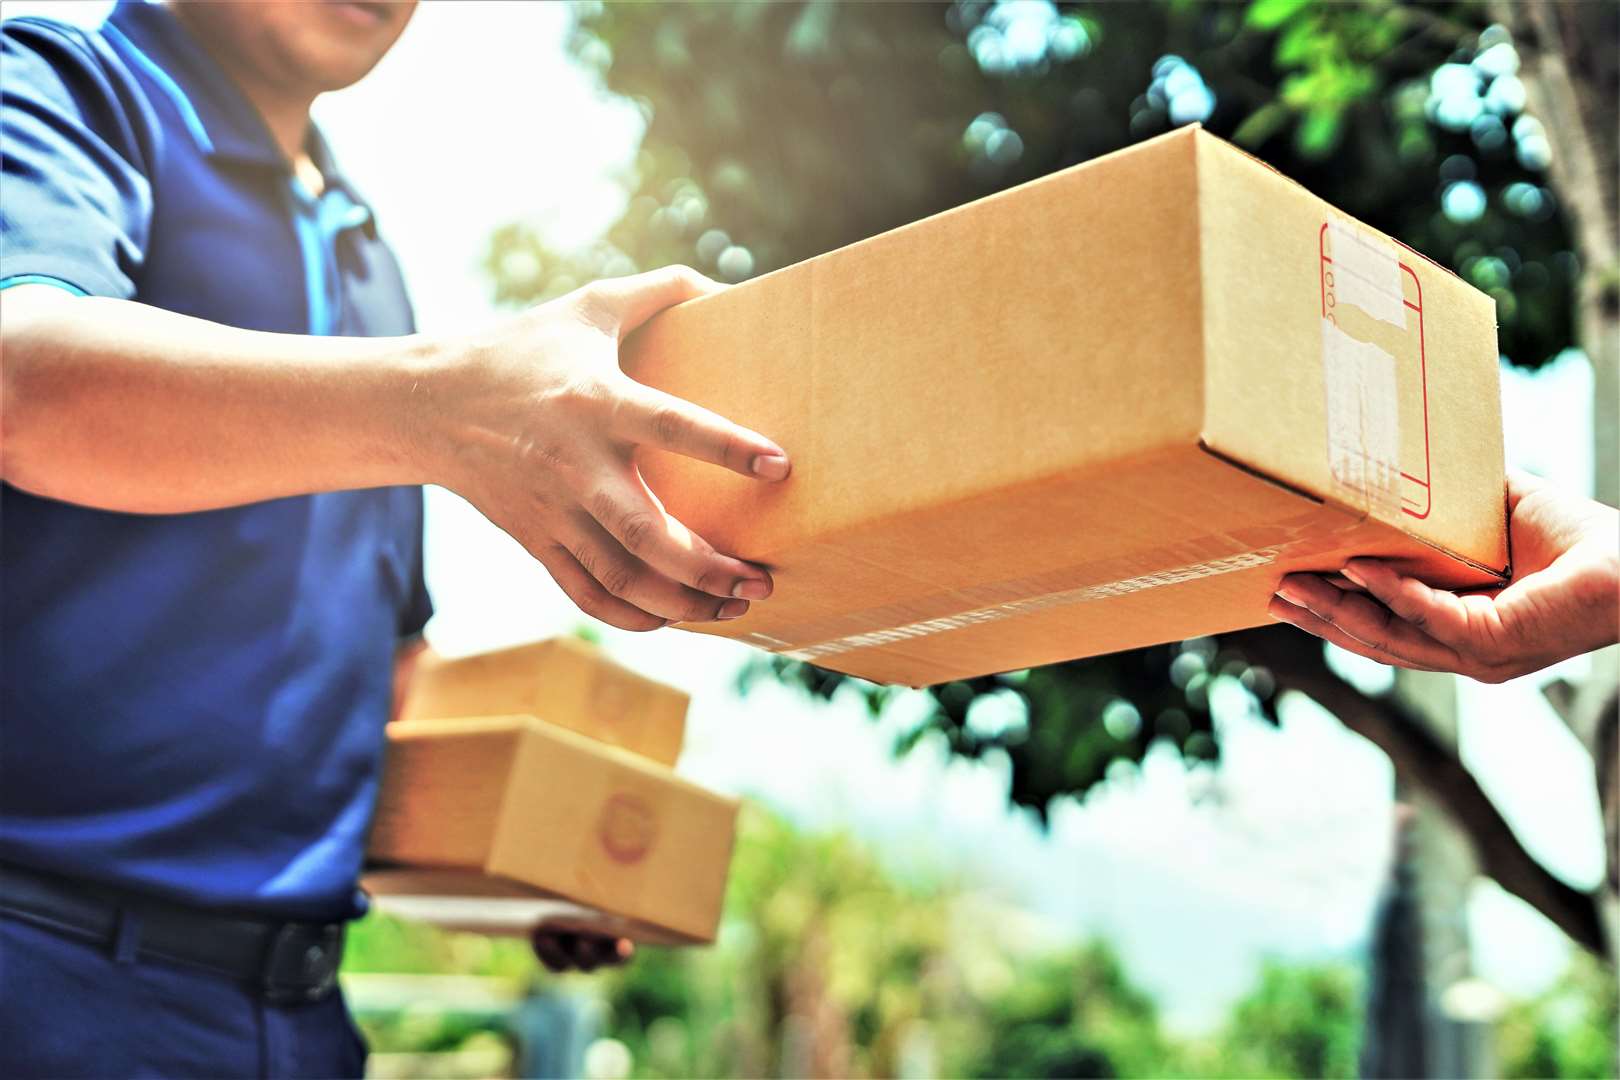 Beware of parcels arriving for products that you never ordered. Picture: AdobeStock